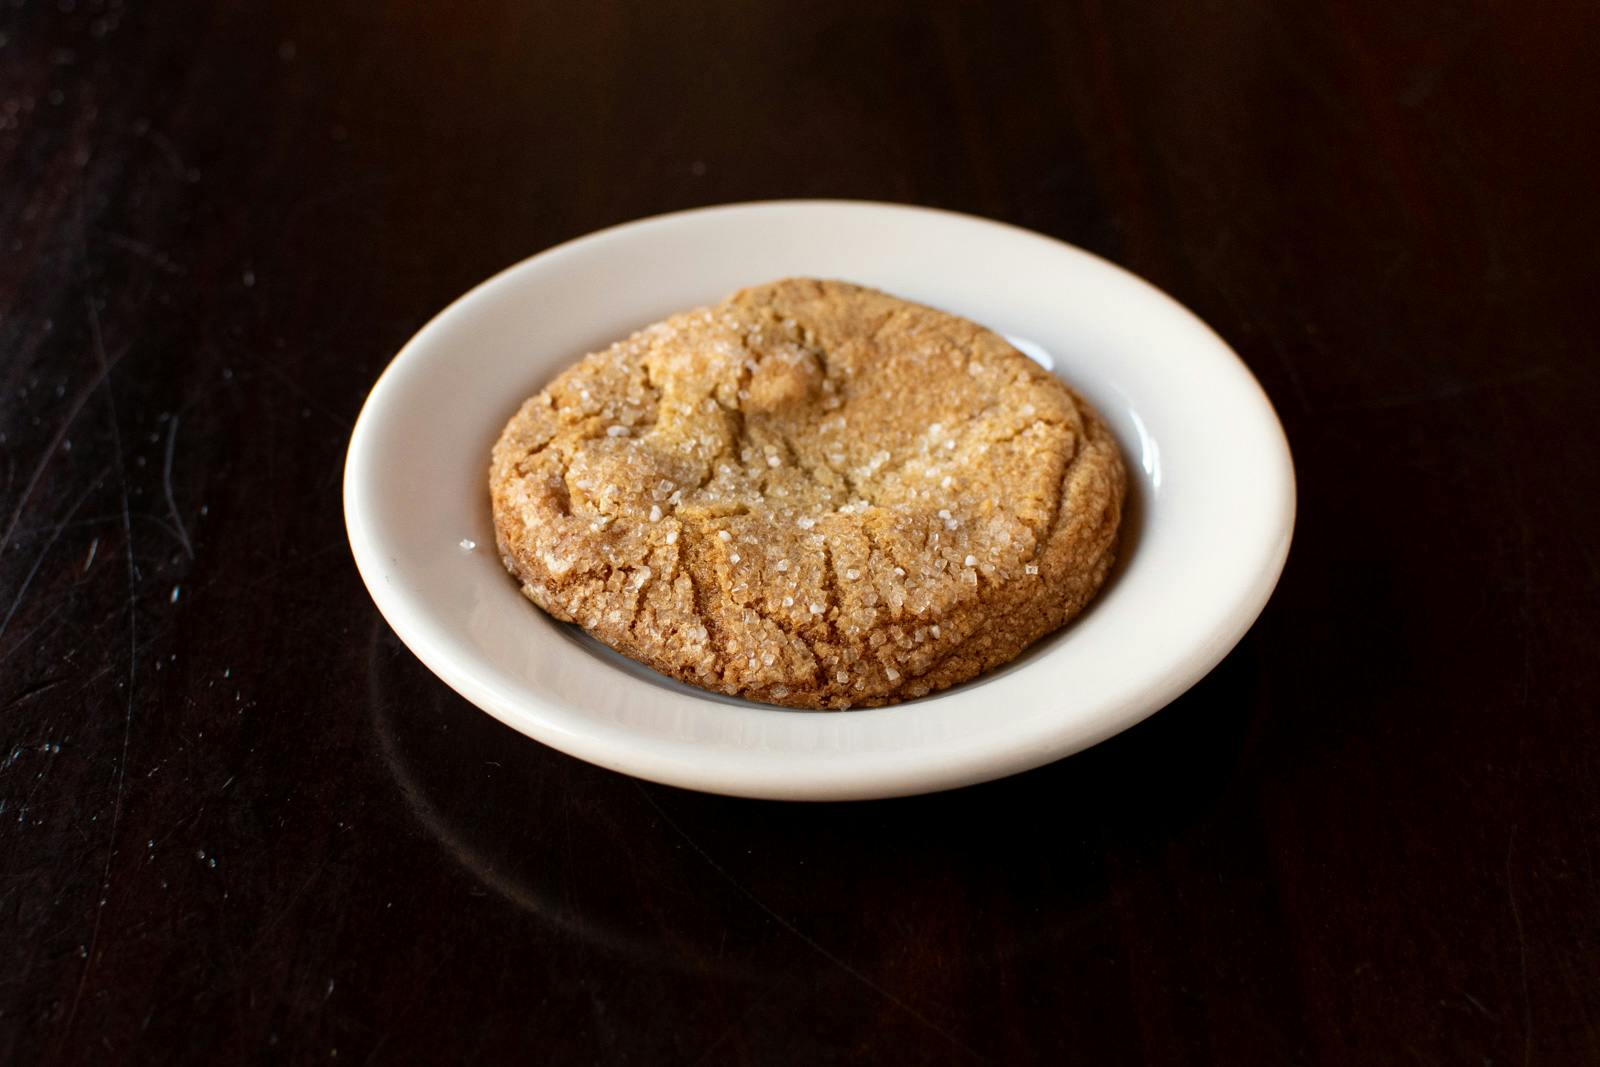 Toffee and White Chocolate Salted Caramel Cookie from Midcoast Wings - Wausau in Wausau, WI